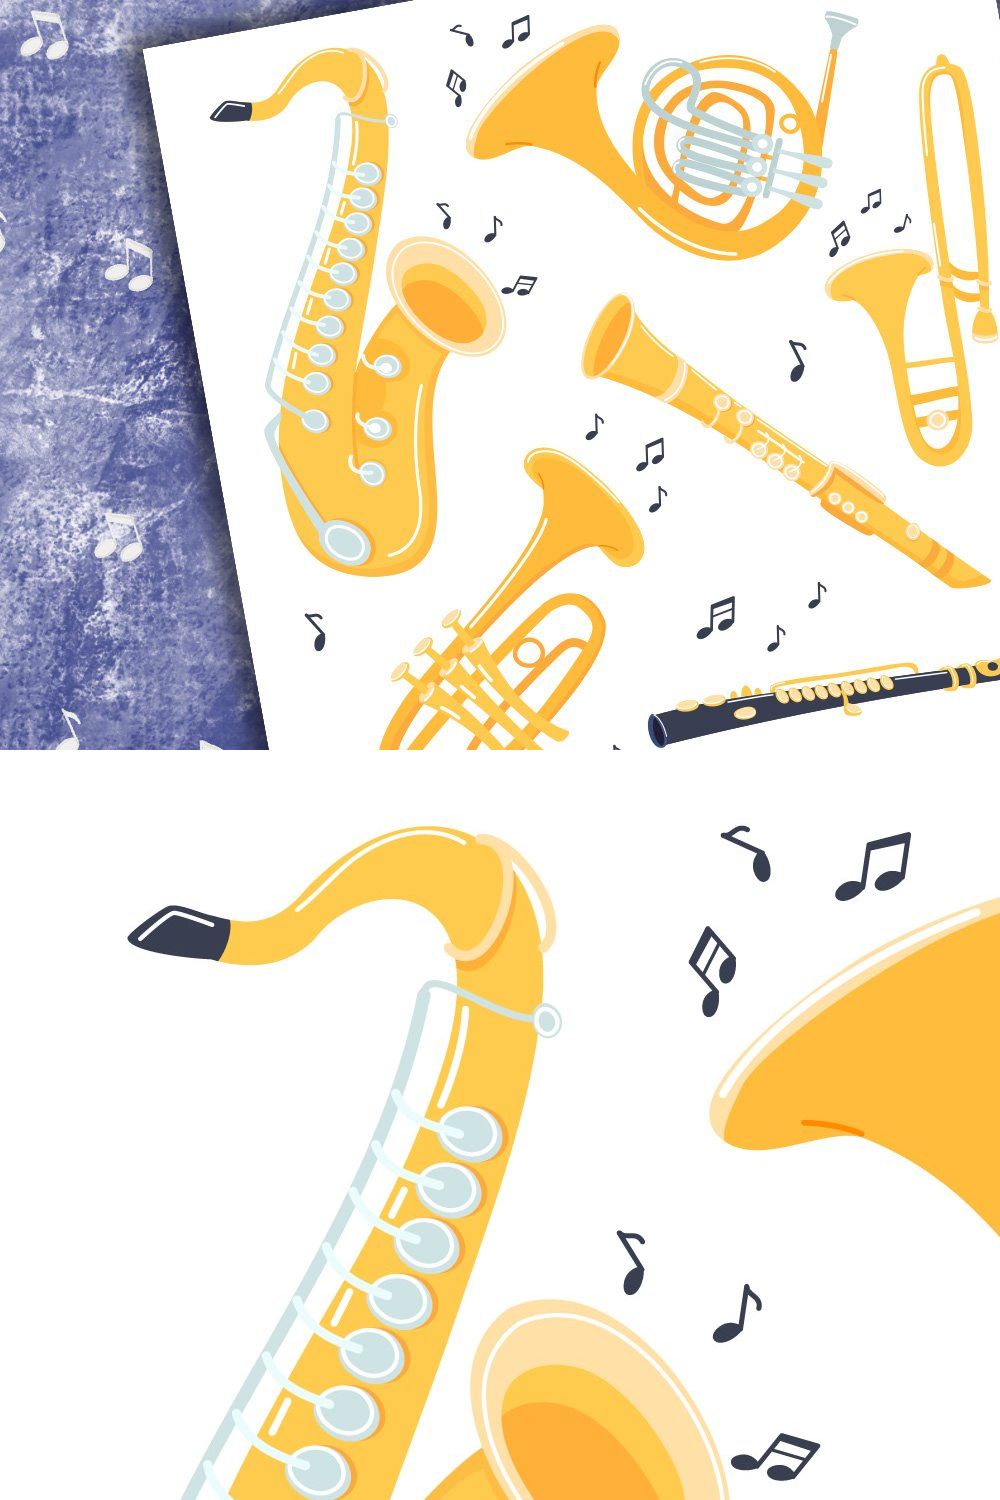 Musical Jazz instrument pinterest preview image.